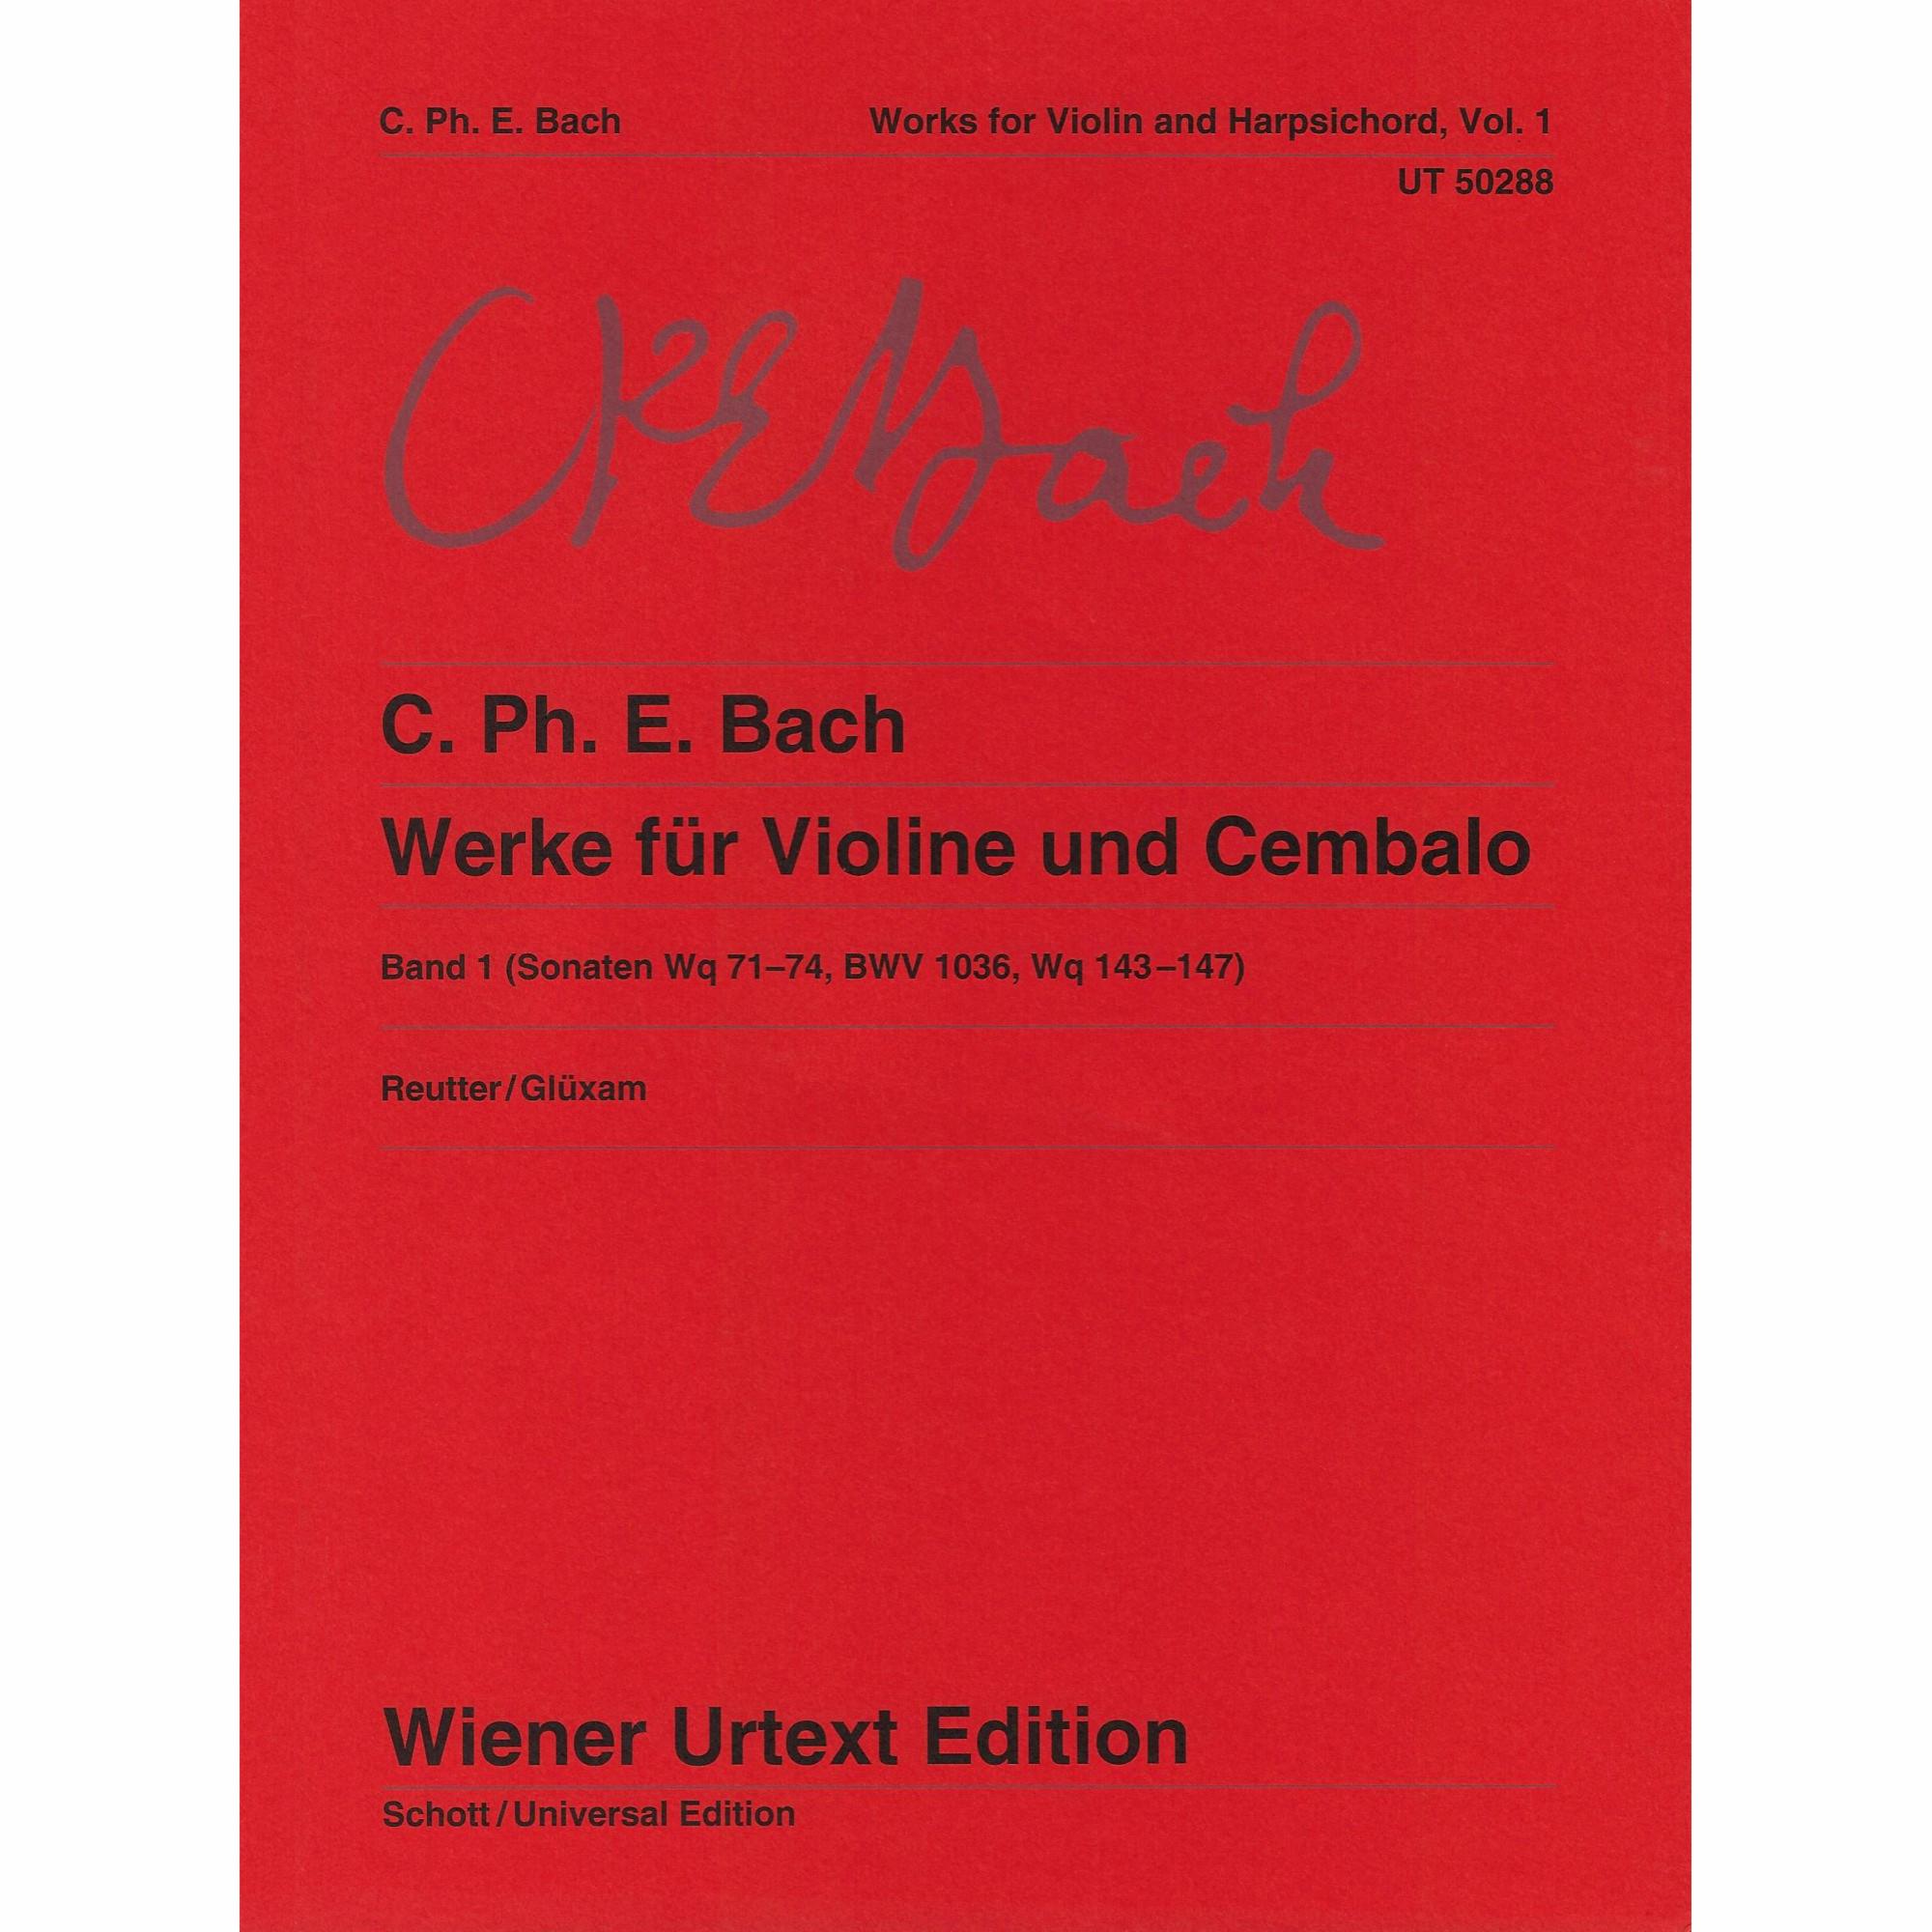 C.P.E. Bach -- Works for Violin and Harpsichord, Vols. 1-2